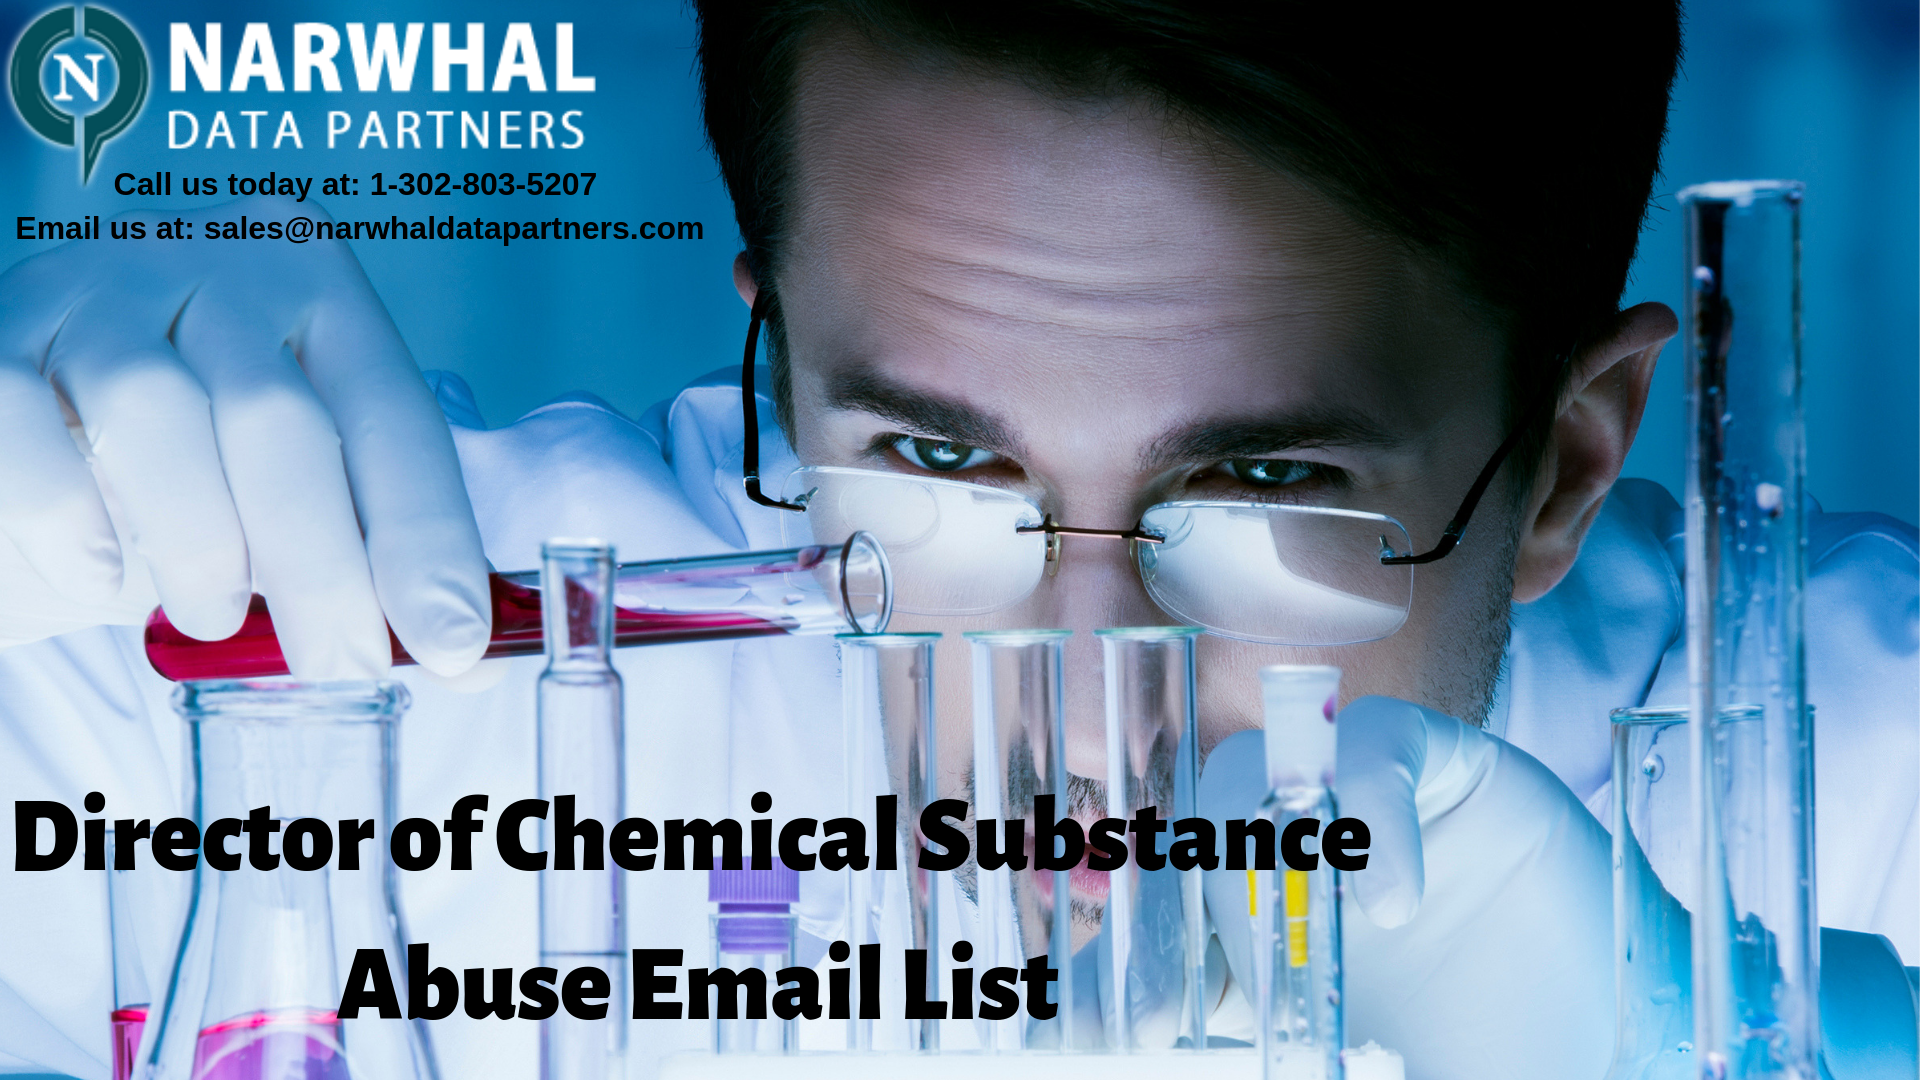 http://narwhaldatapartners.com/director-of-chemical-substance-abuse-email-list.html